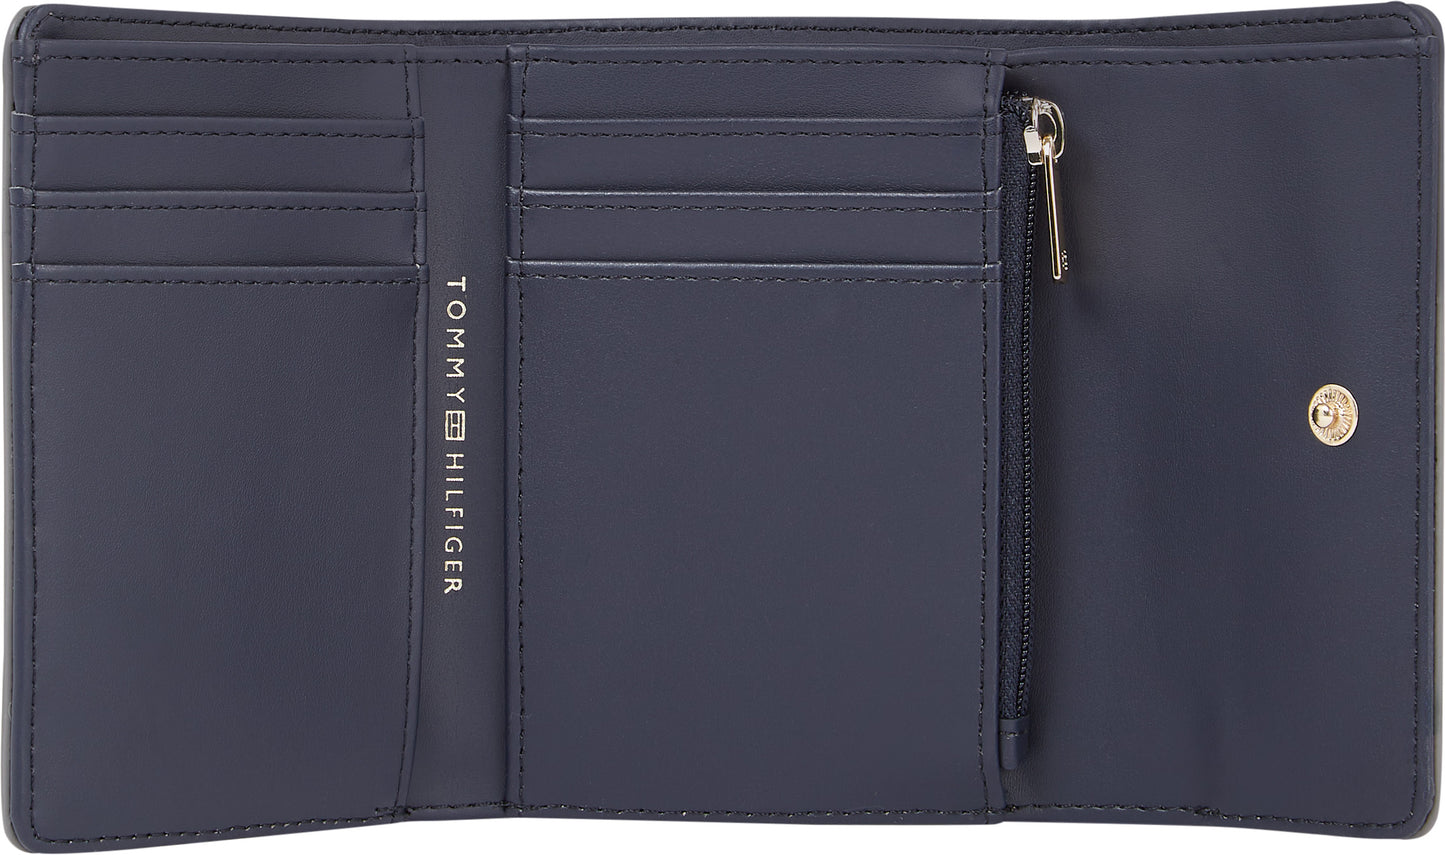 MEDIUM WALLET WITH FLAP AND MONOGRAM TH AW0AW15258 -PSE